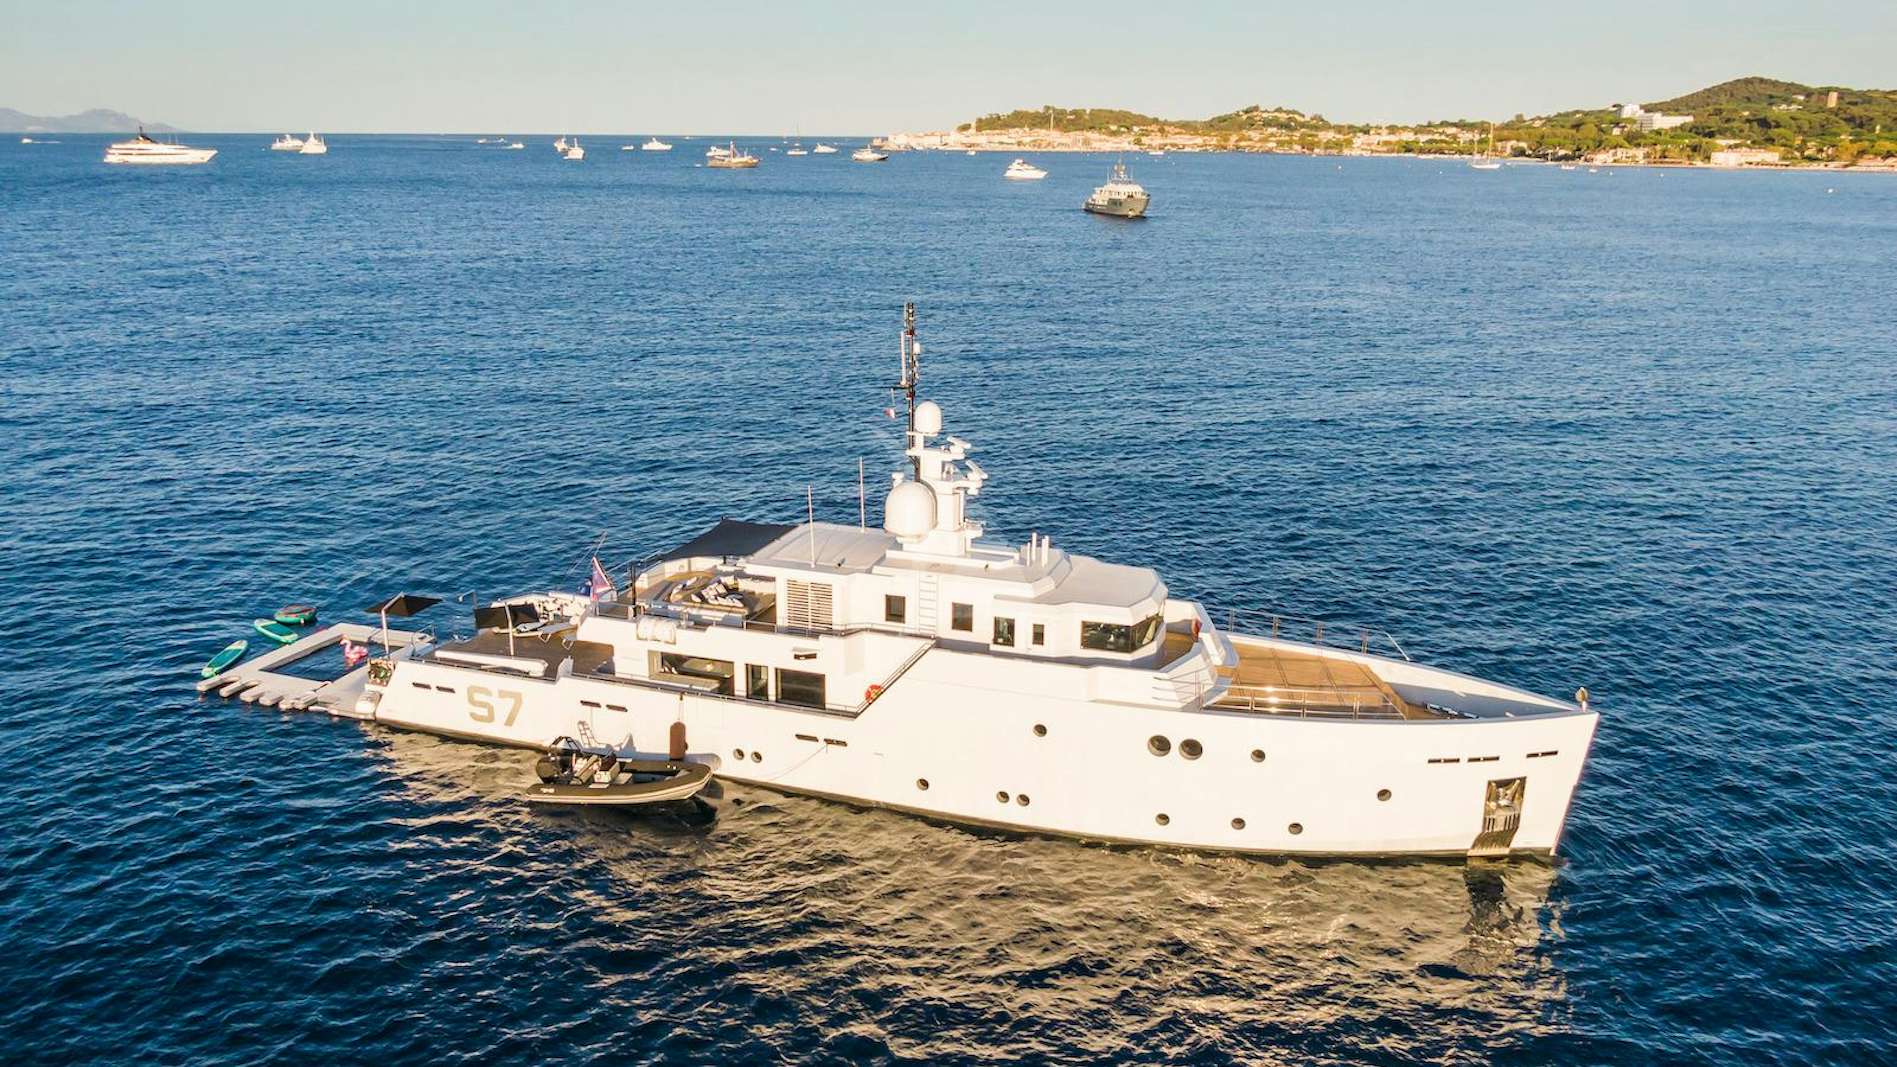 Watch Video for S7 Yacht for Charter